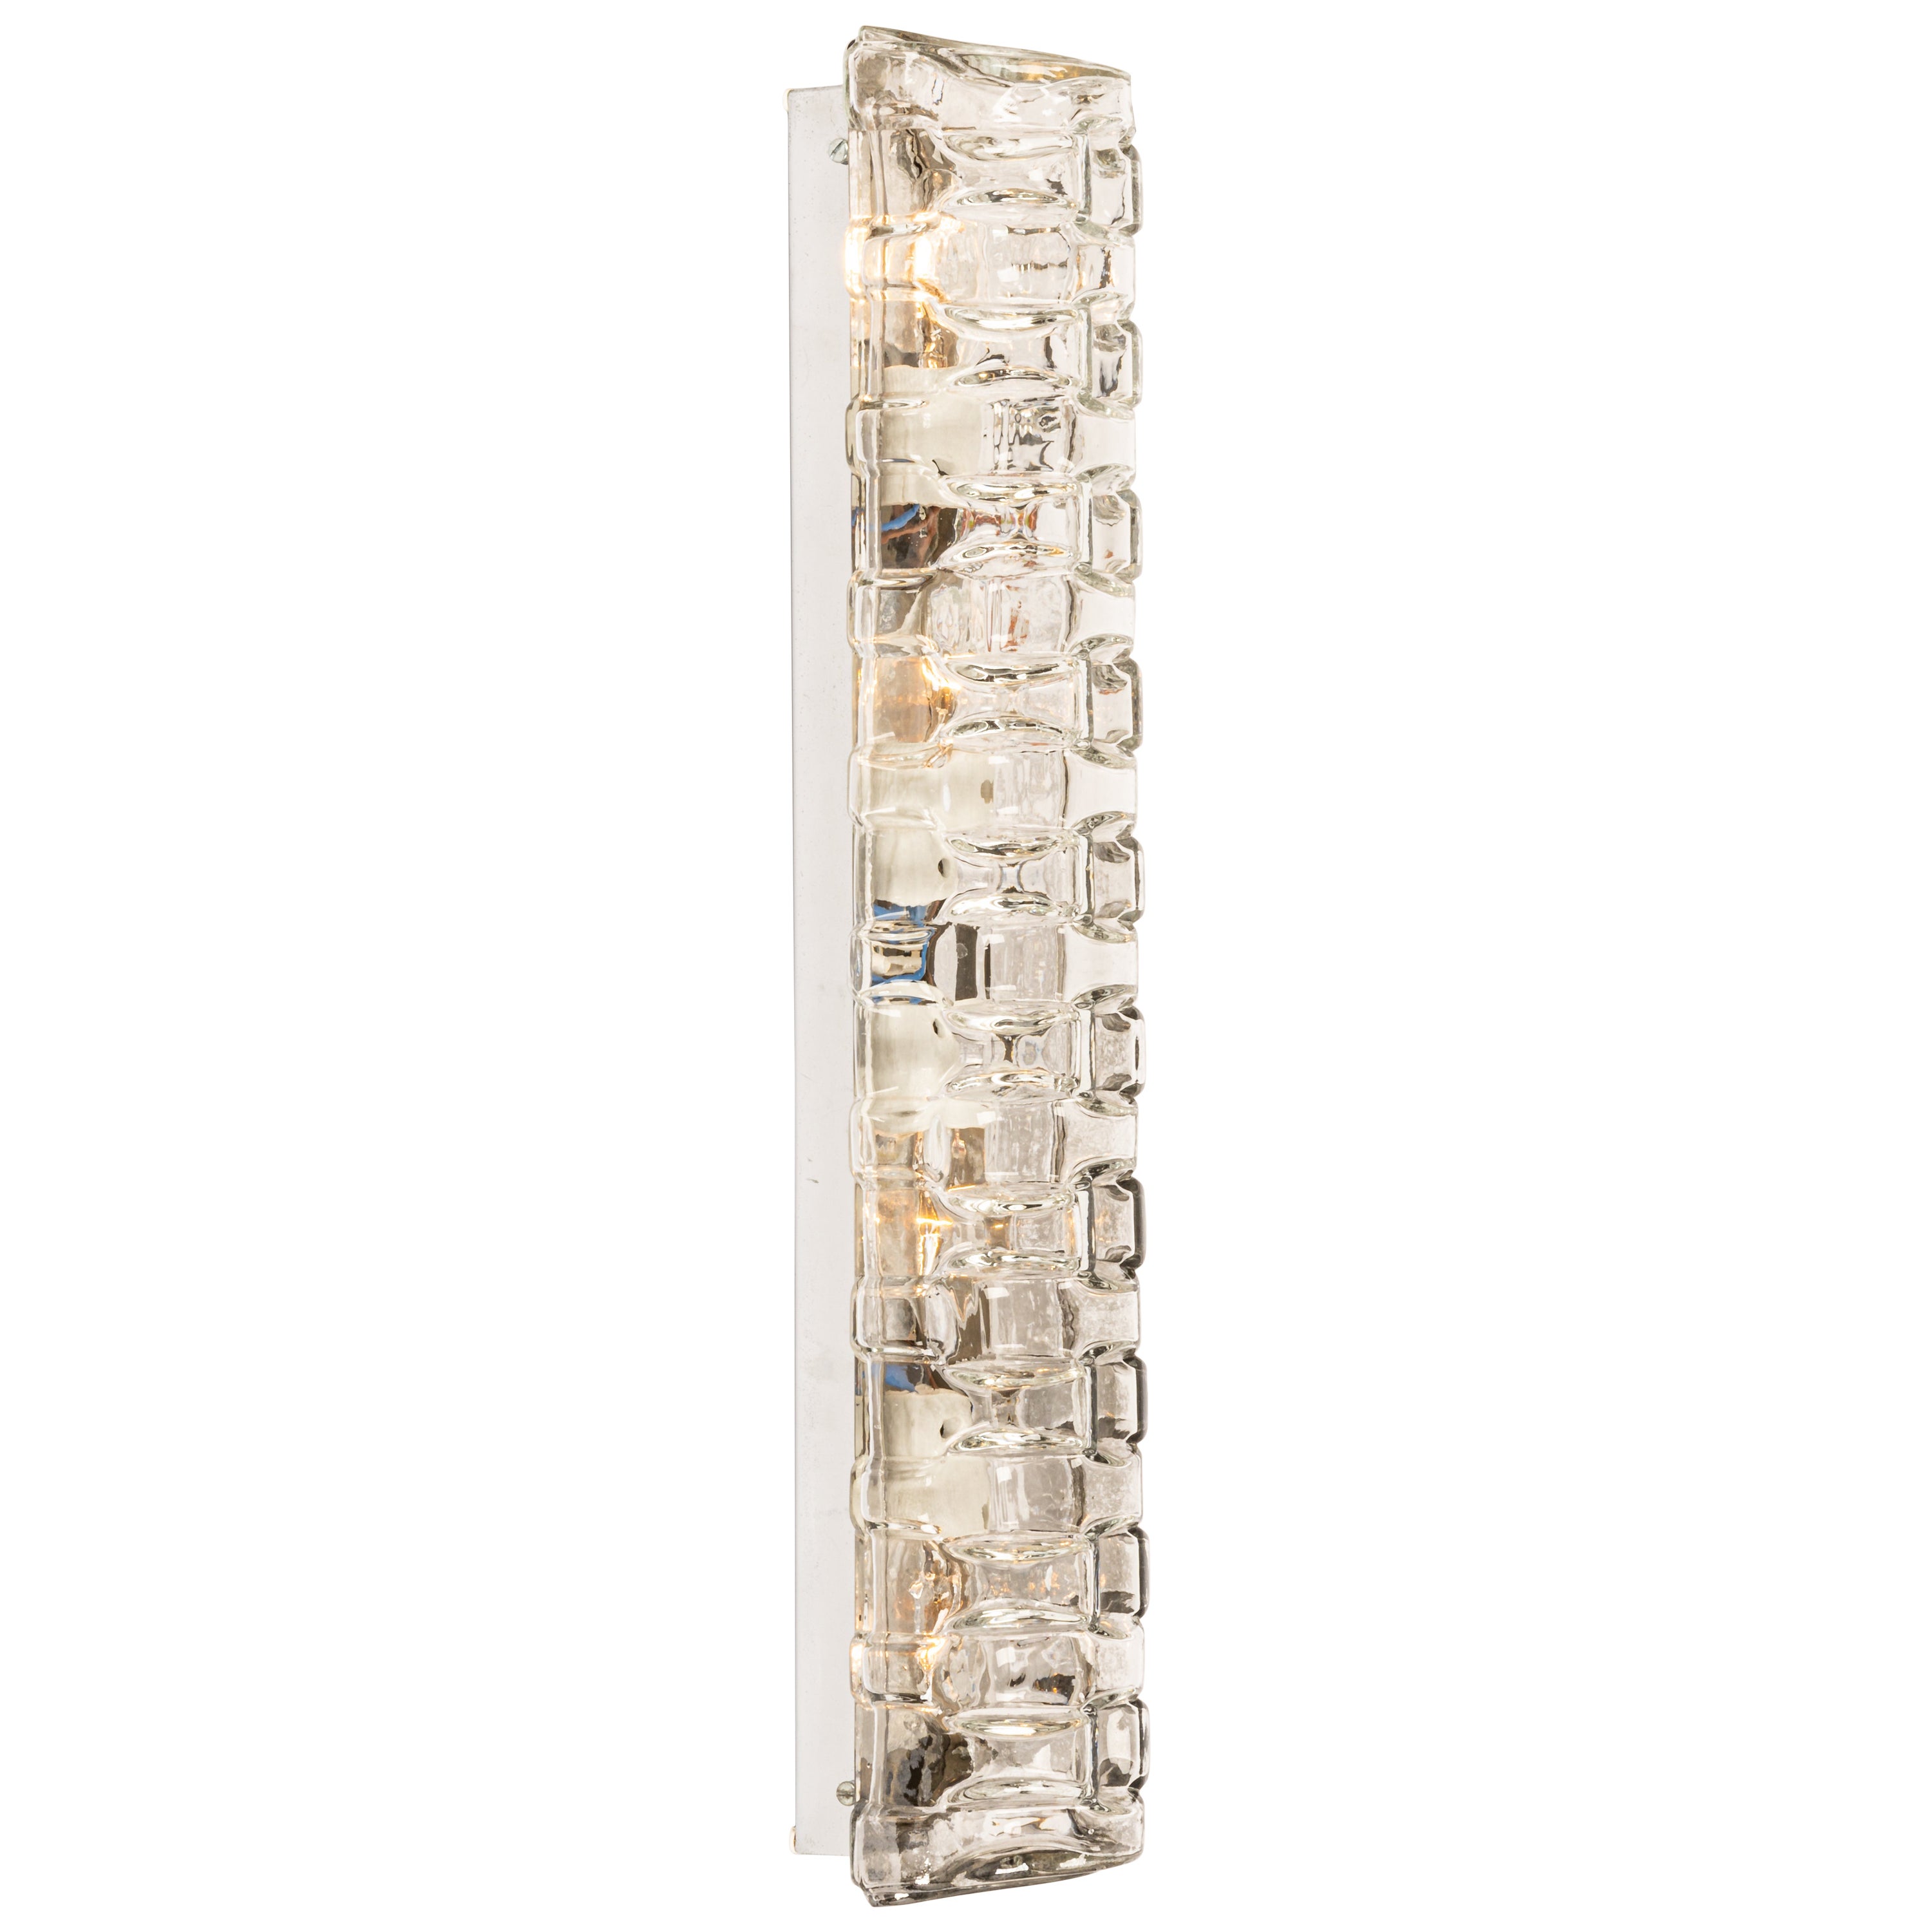 Large Glass Sconce Wall Fixture by Hillebrand, Germany